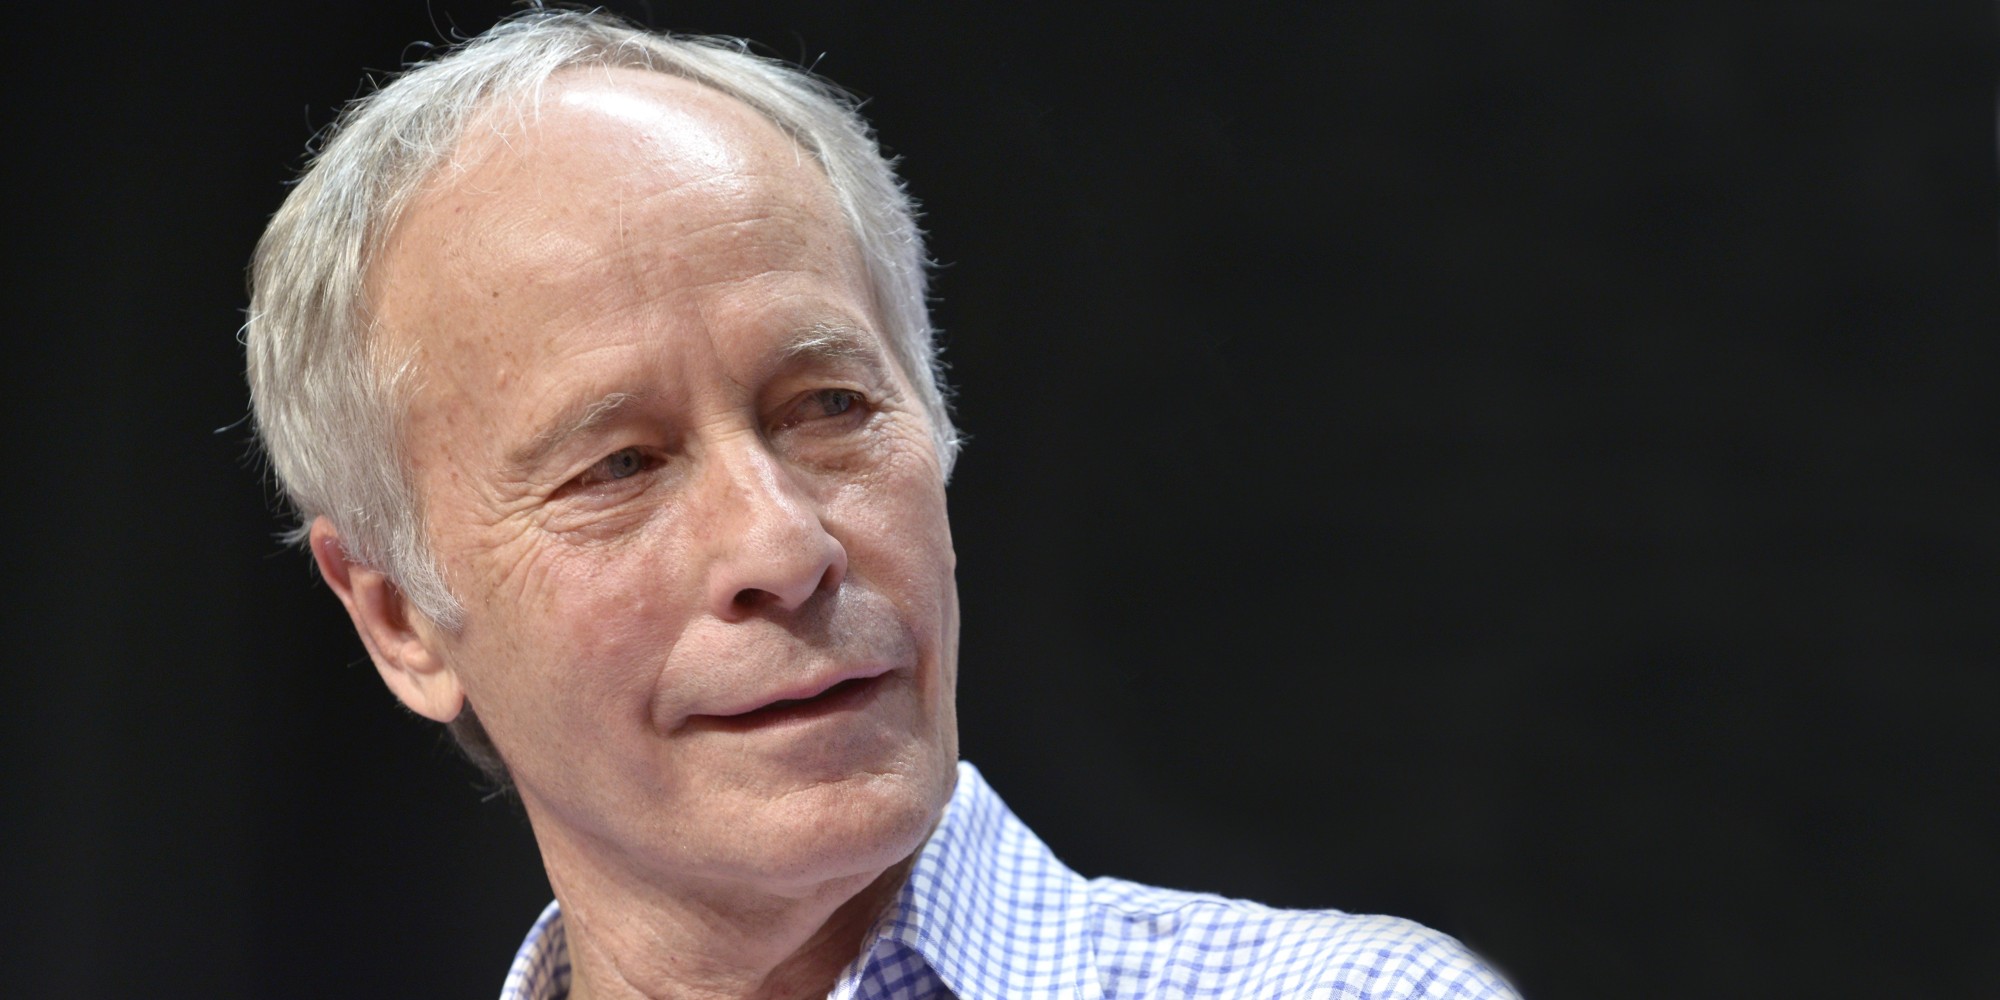 Richard ford audio interview #9